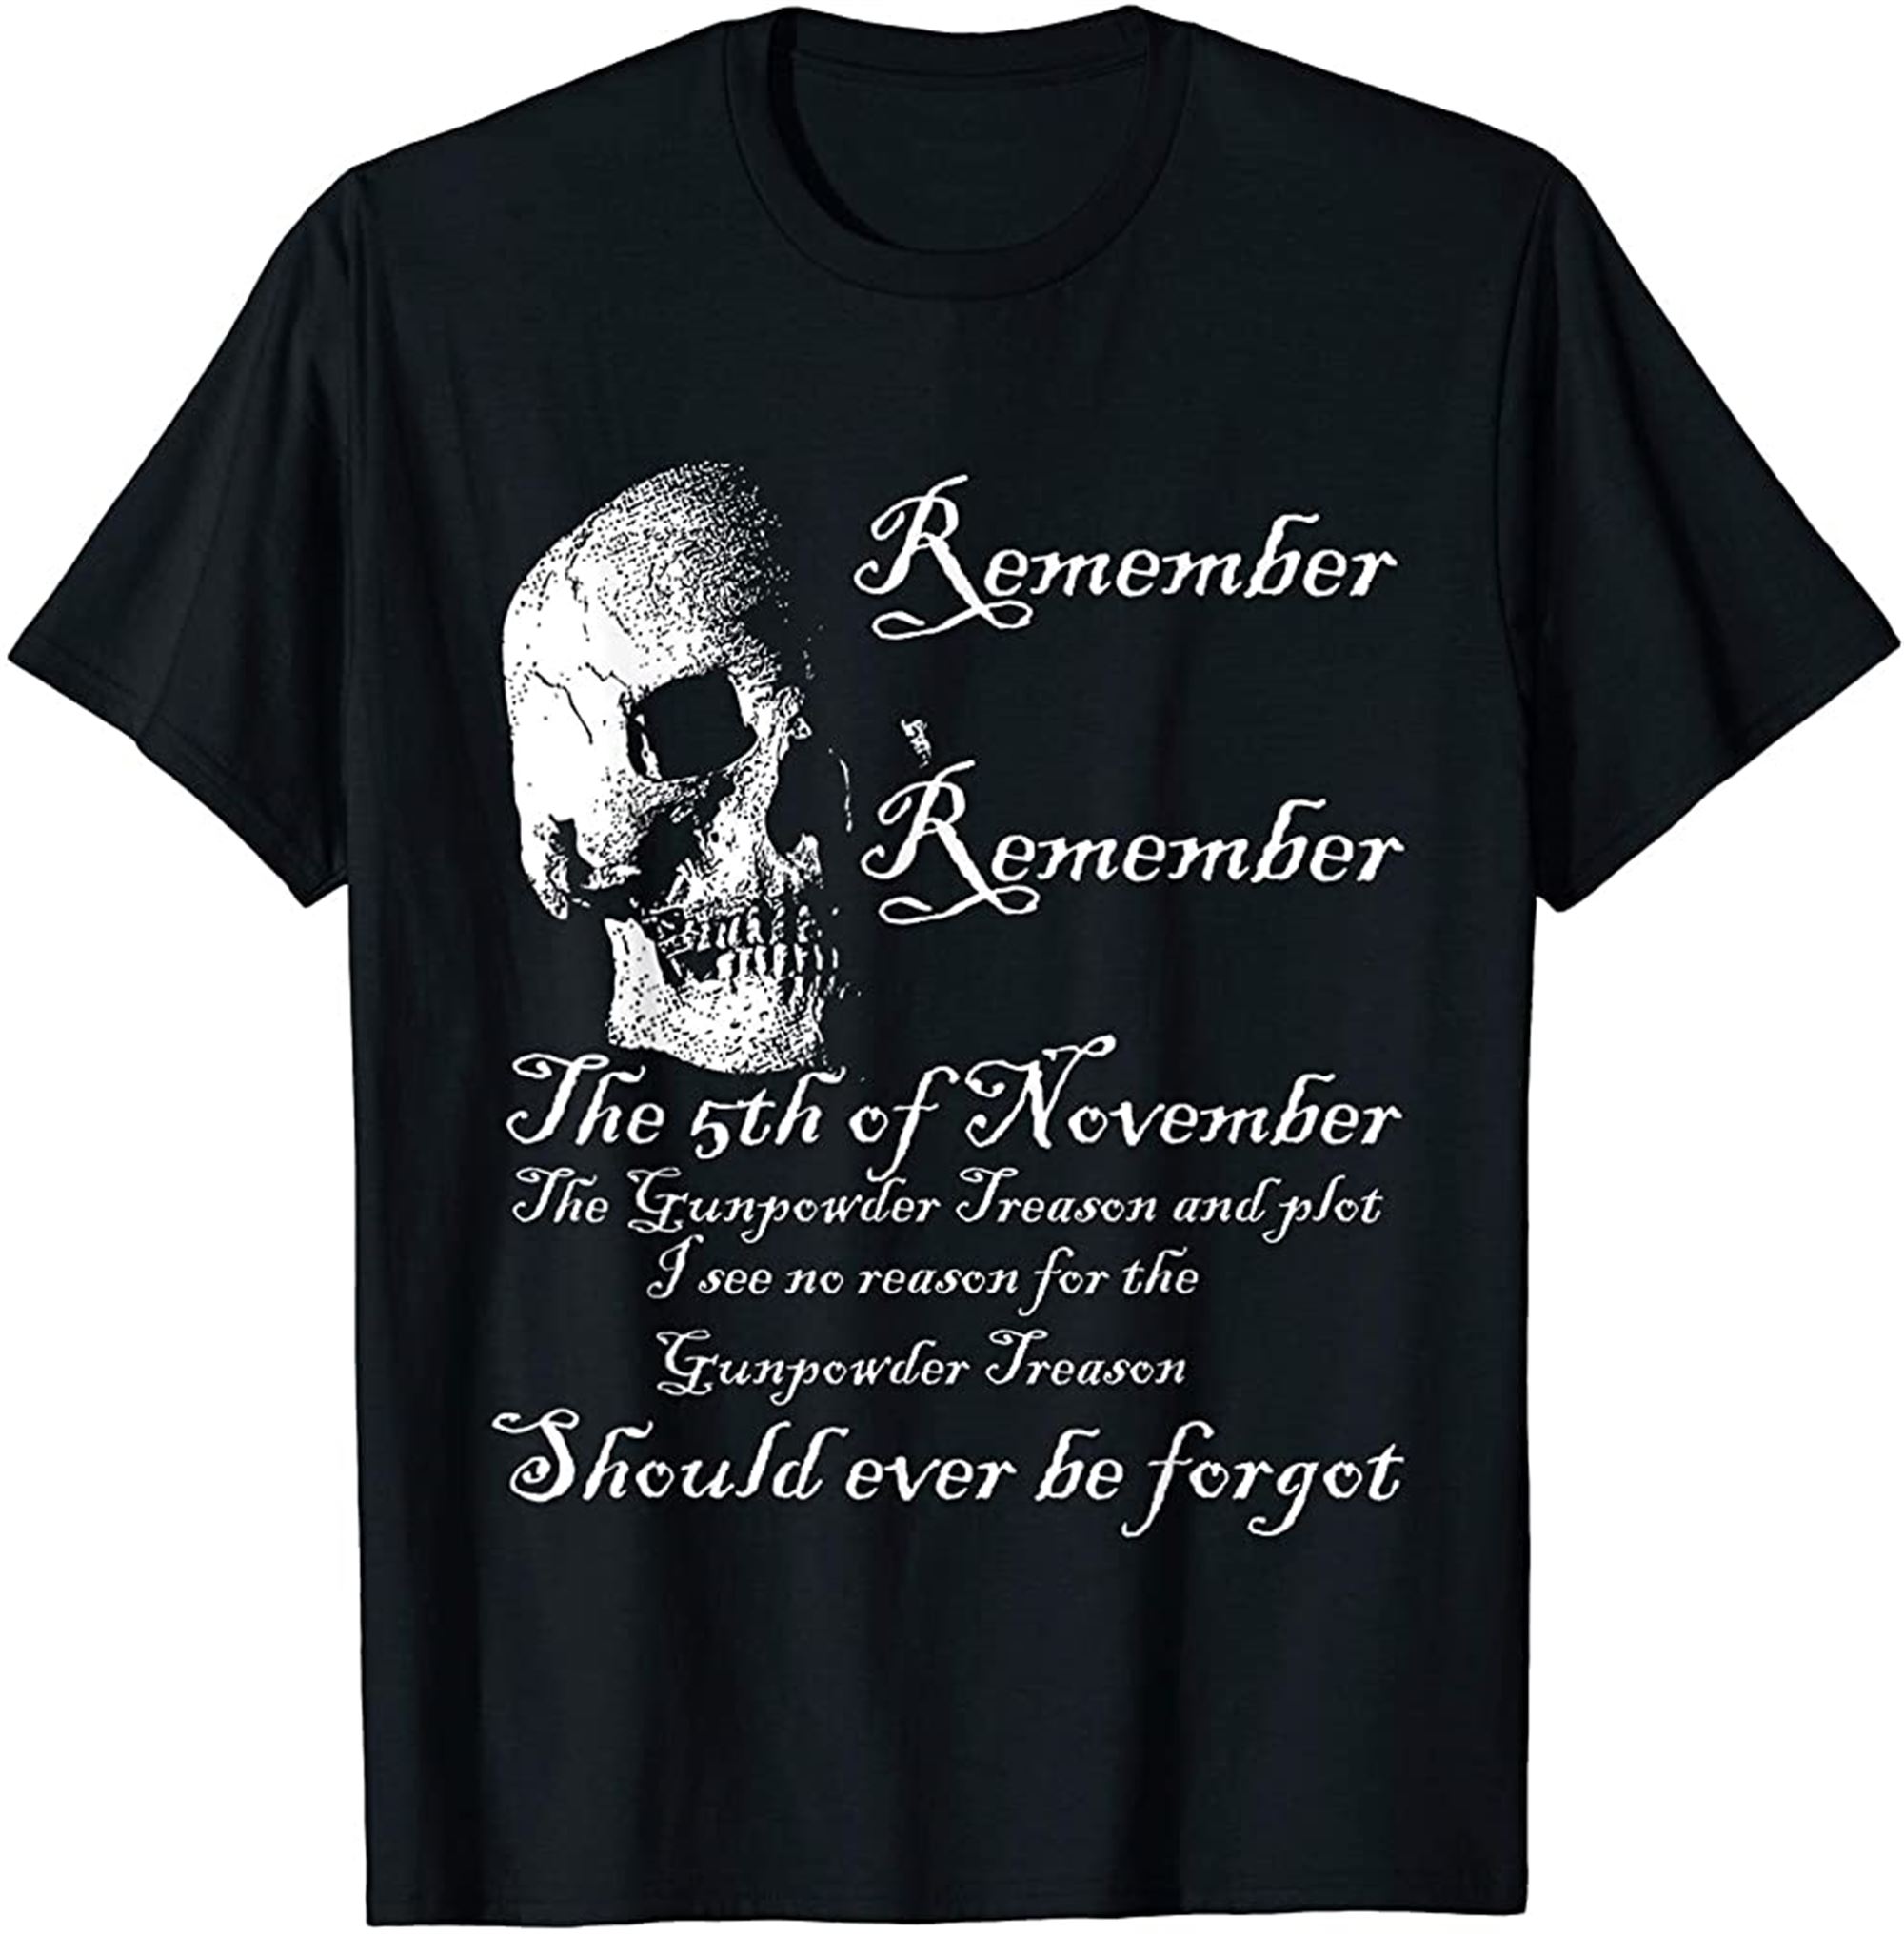 Skull 5th Of November Guy Fawkes Quote T Shirt Plus Size Up To 5xl